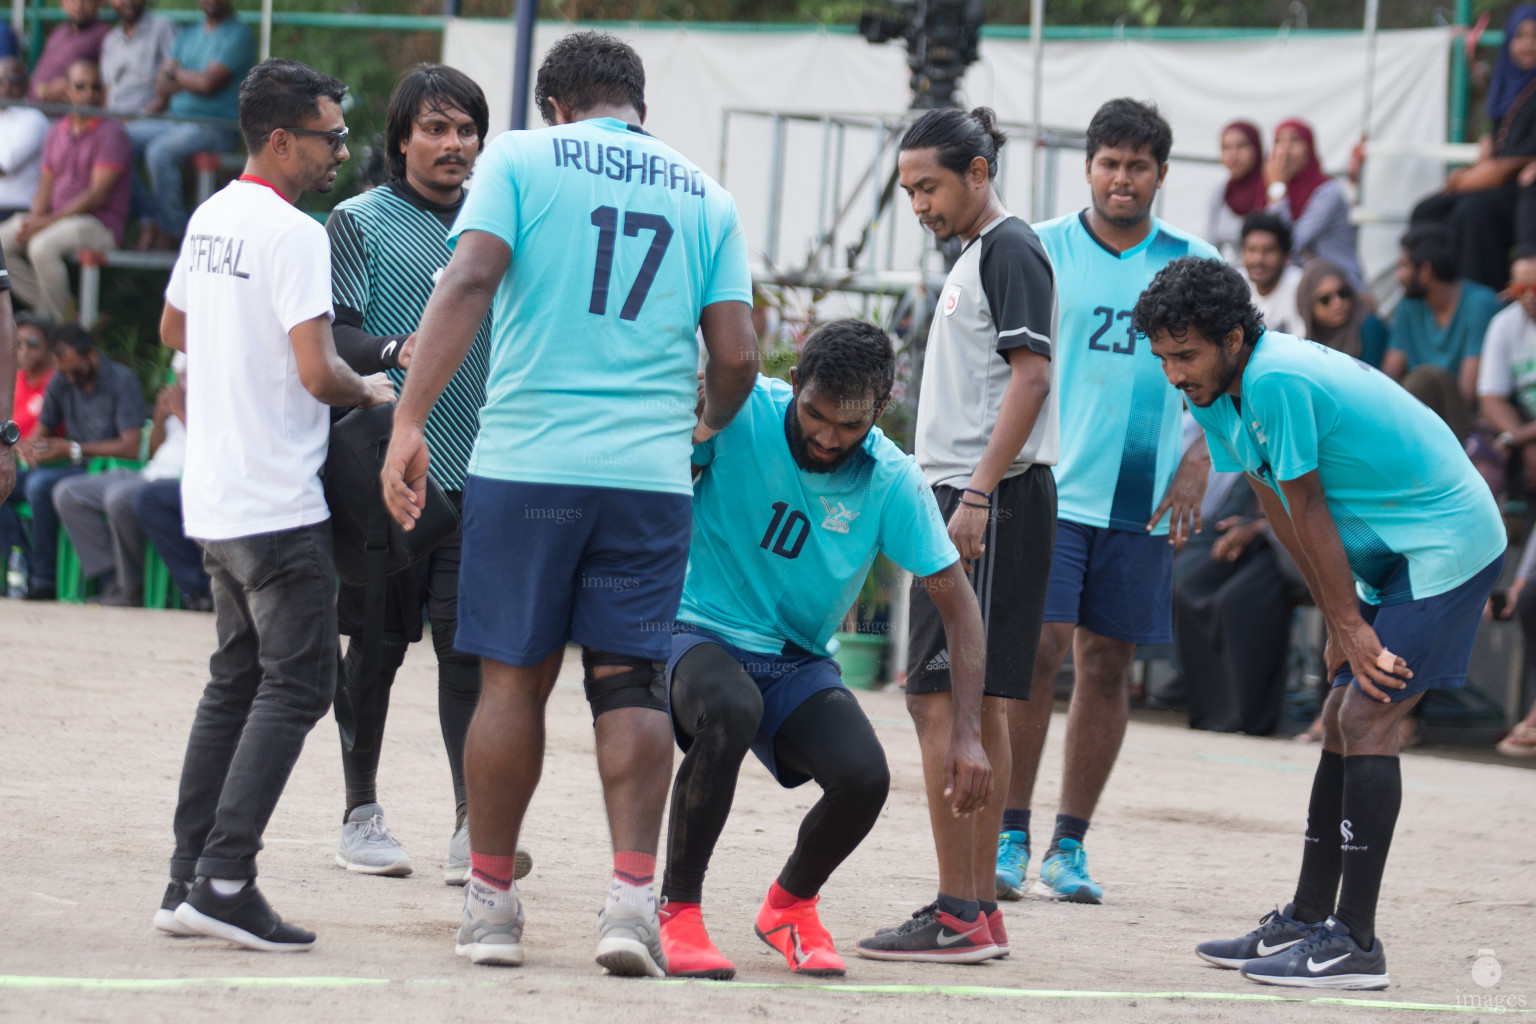 MMA vs IGMH in Inter Office Handball Tournament 2019 - Men's 2nd Division Final, held in National Handball Grounds on 5th March 2019 (Hassan Simah /Images.mv)